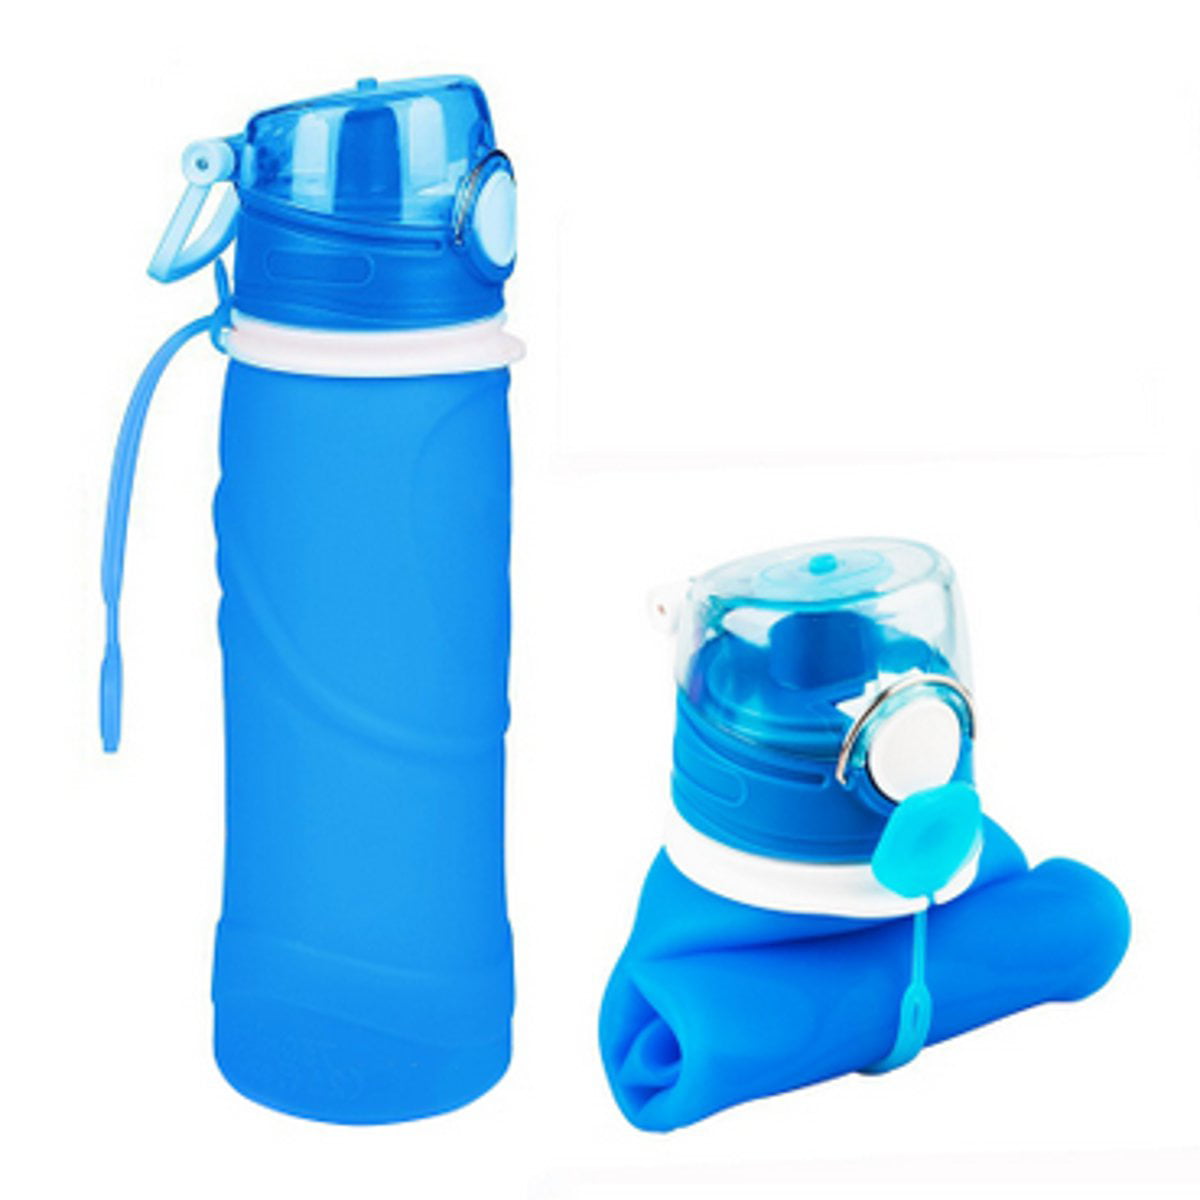 Collapsible Water Bottle Silicone Reusable Leak-Proof Travel Hiking Sports 26 oz 